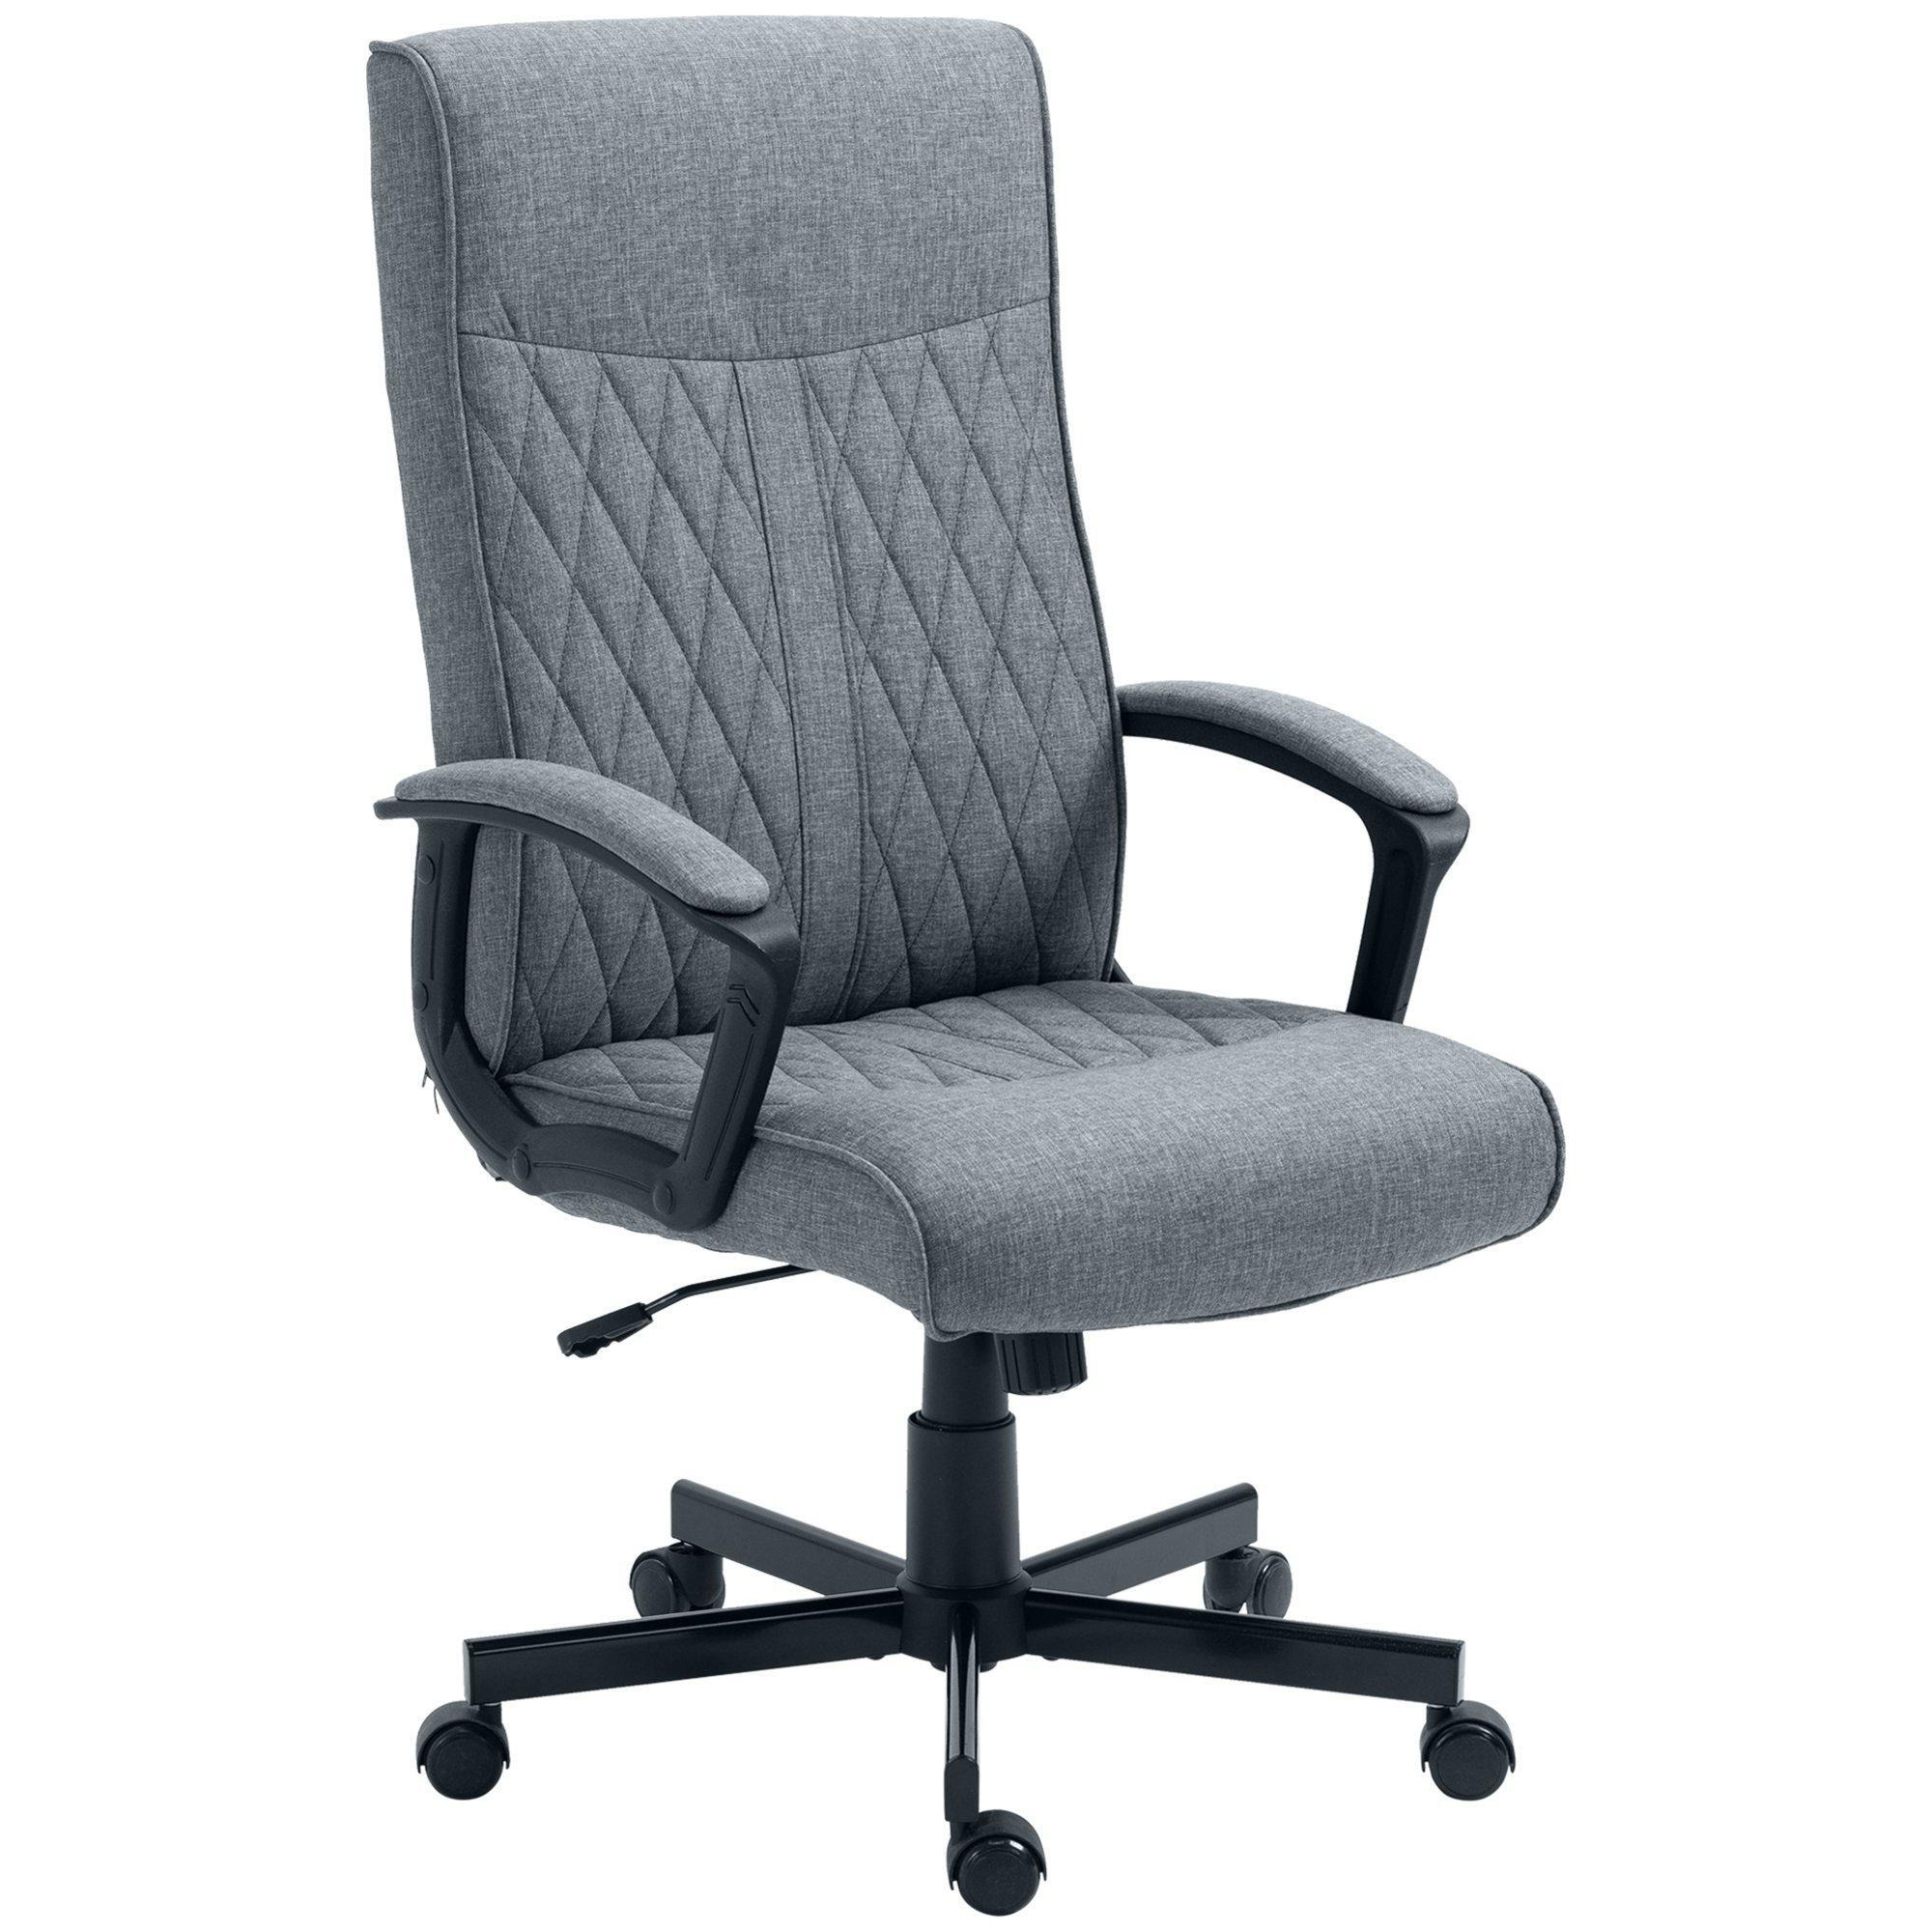 Home Office Chair High Back Swivel Computer Chair for Bedroom Study - image 1